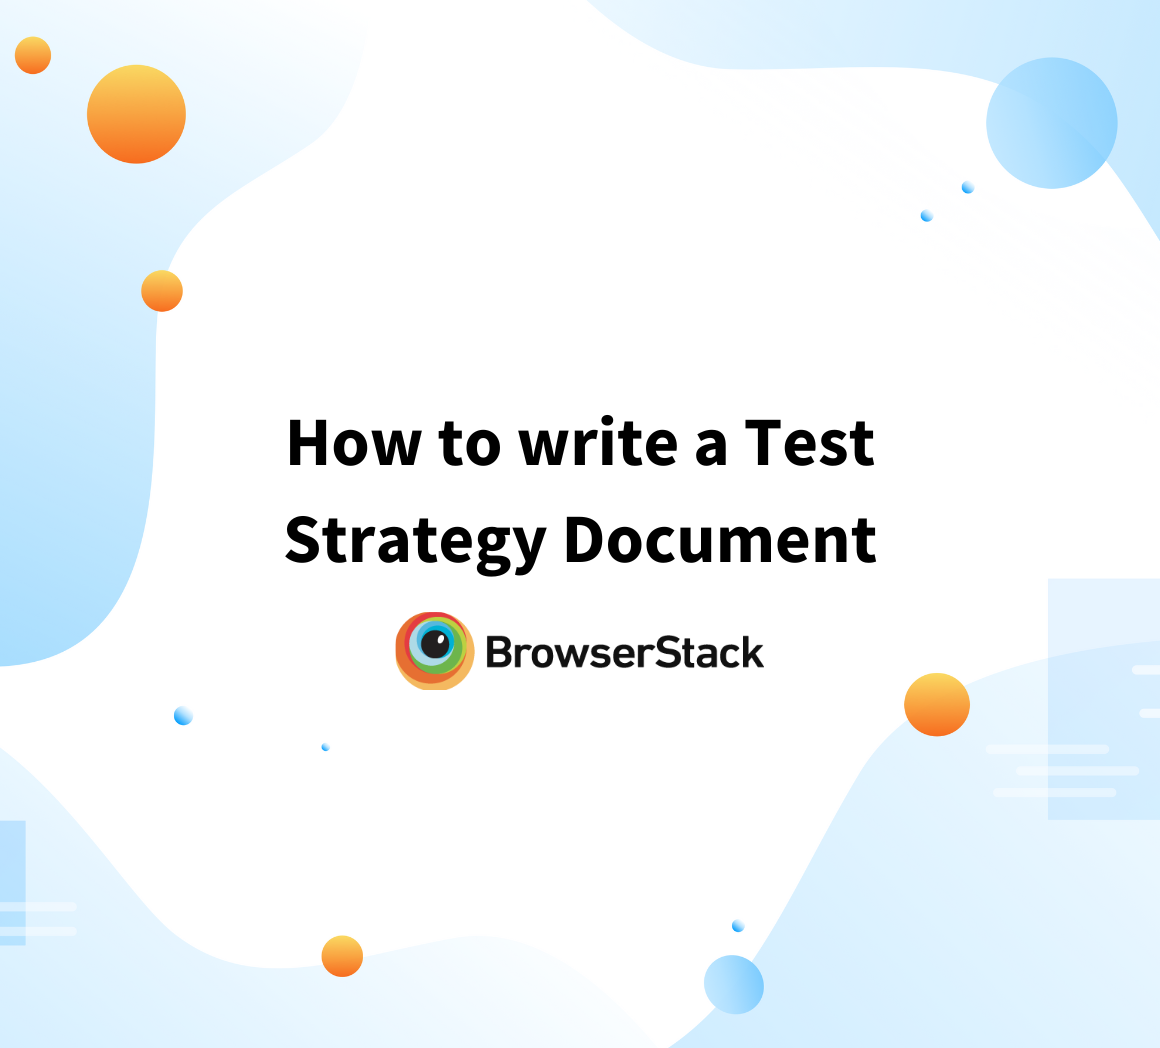 How to write a Test Strategy Document